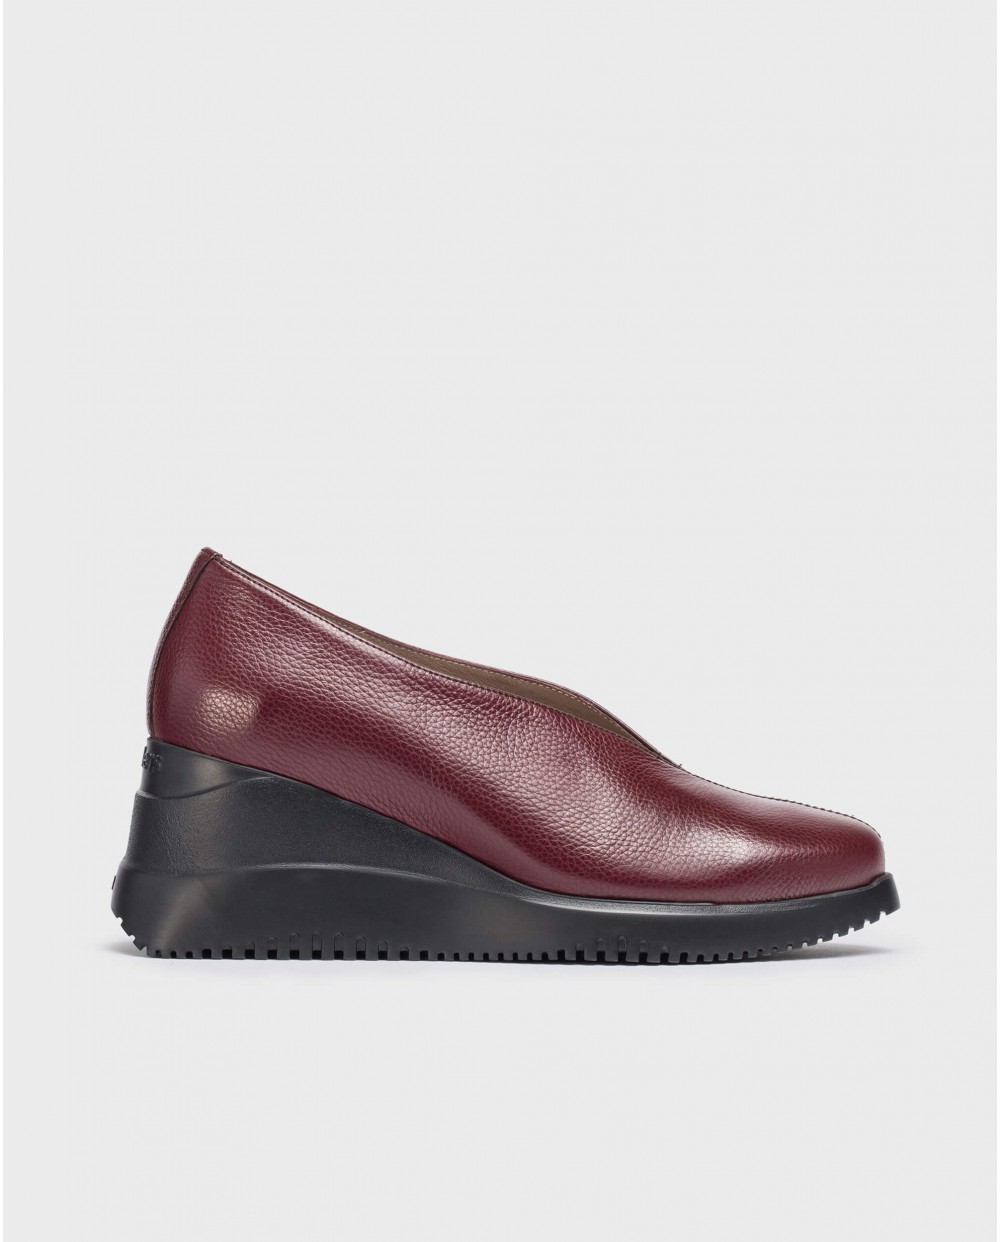 Wonders-Outlet-Burgundy WATER moccasin